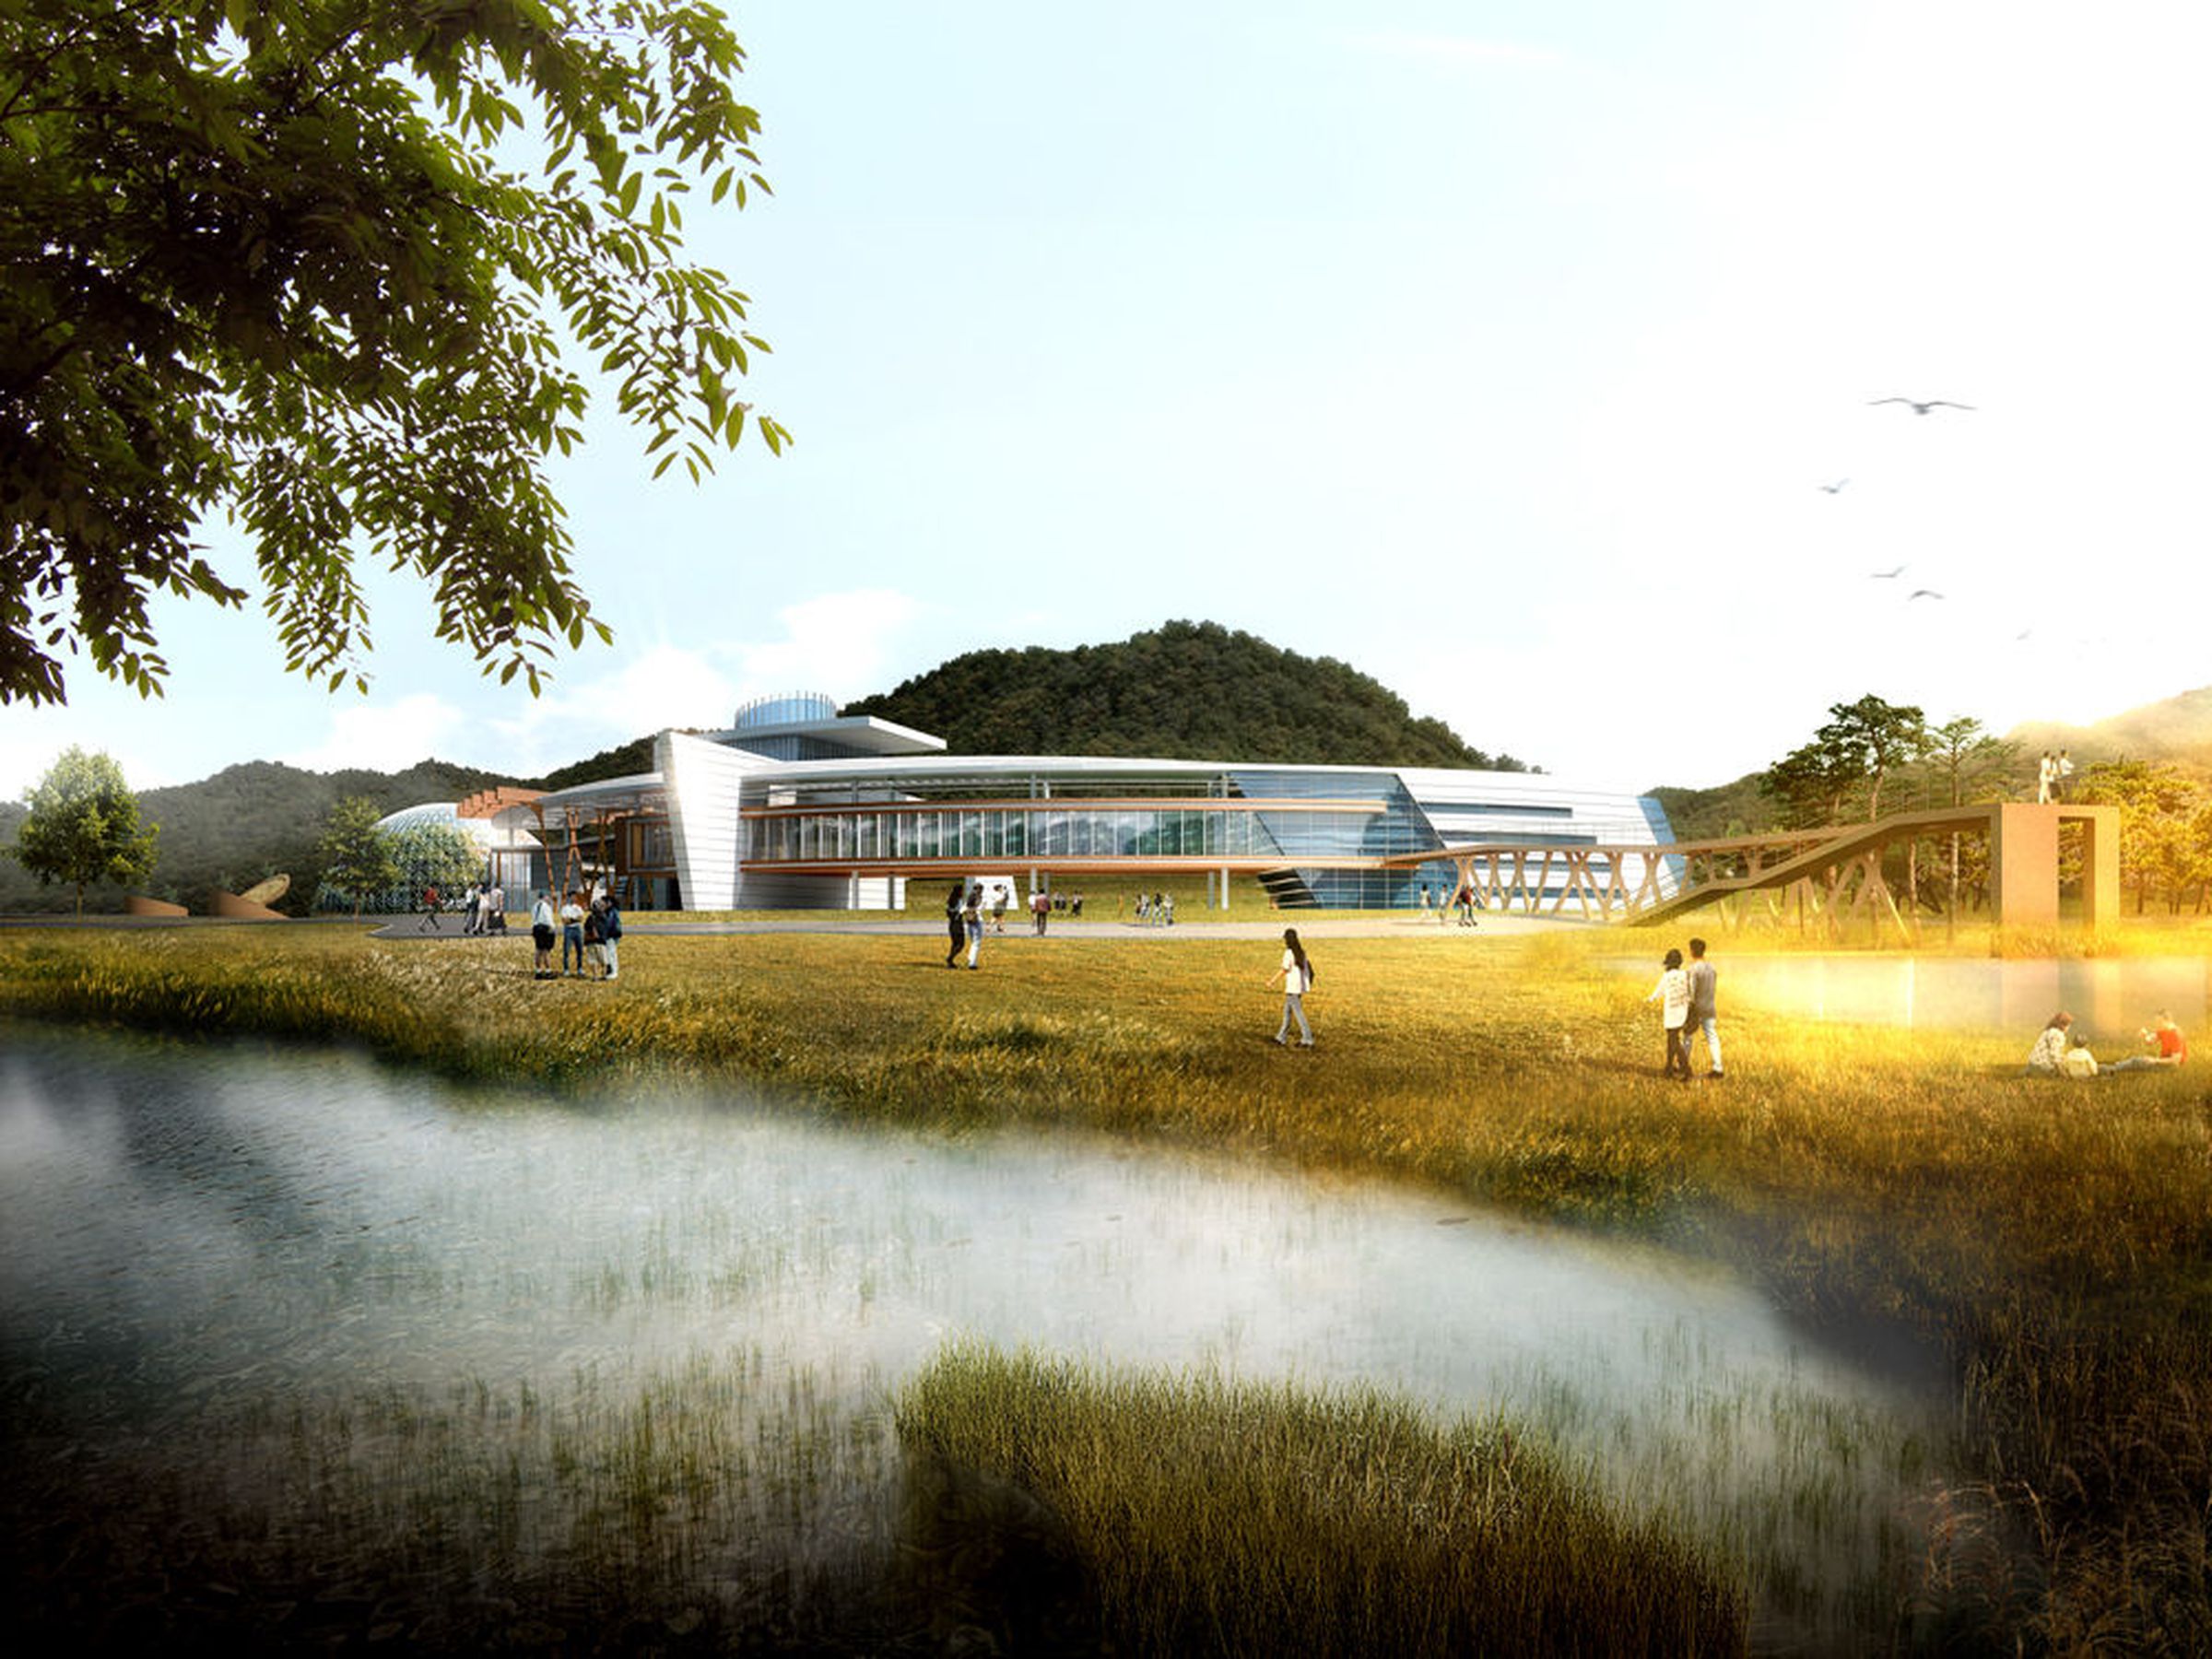 Samoo National Research Center for Endangered Species renders